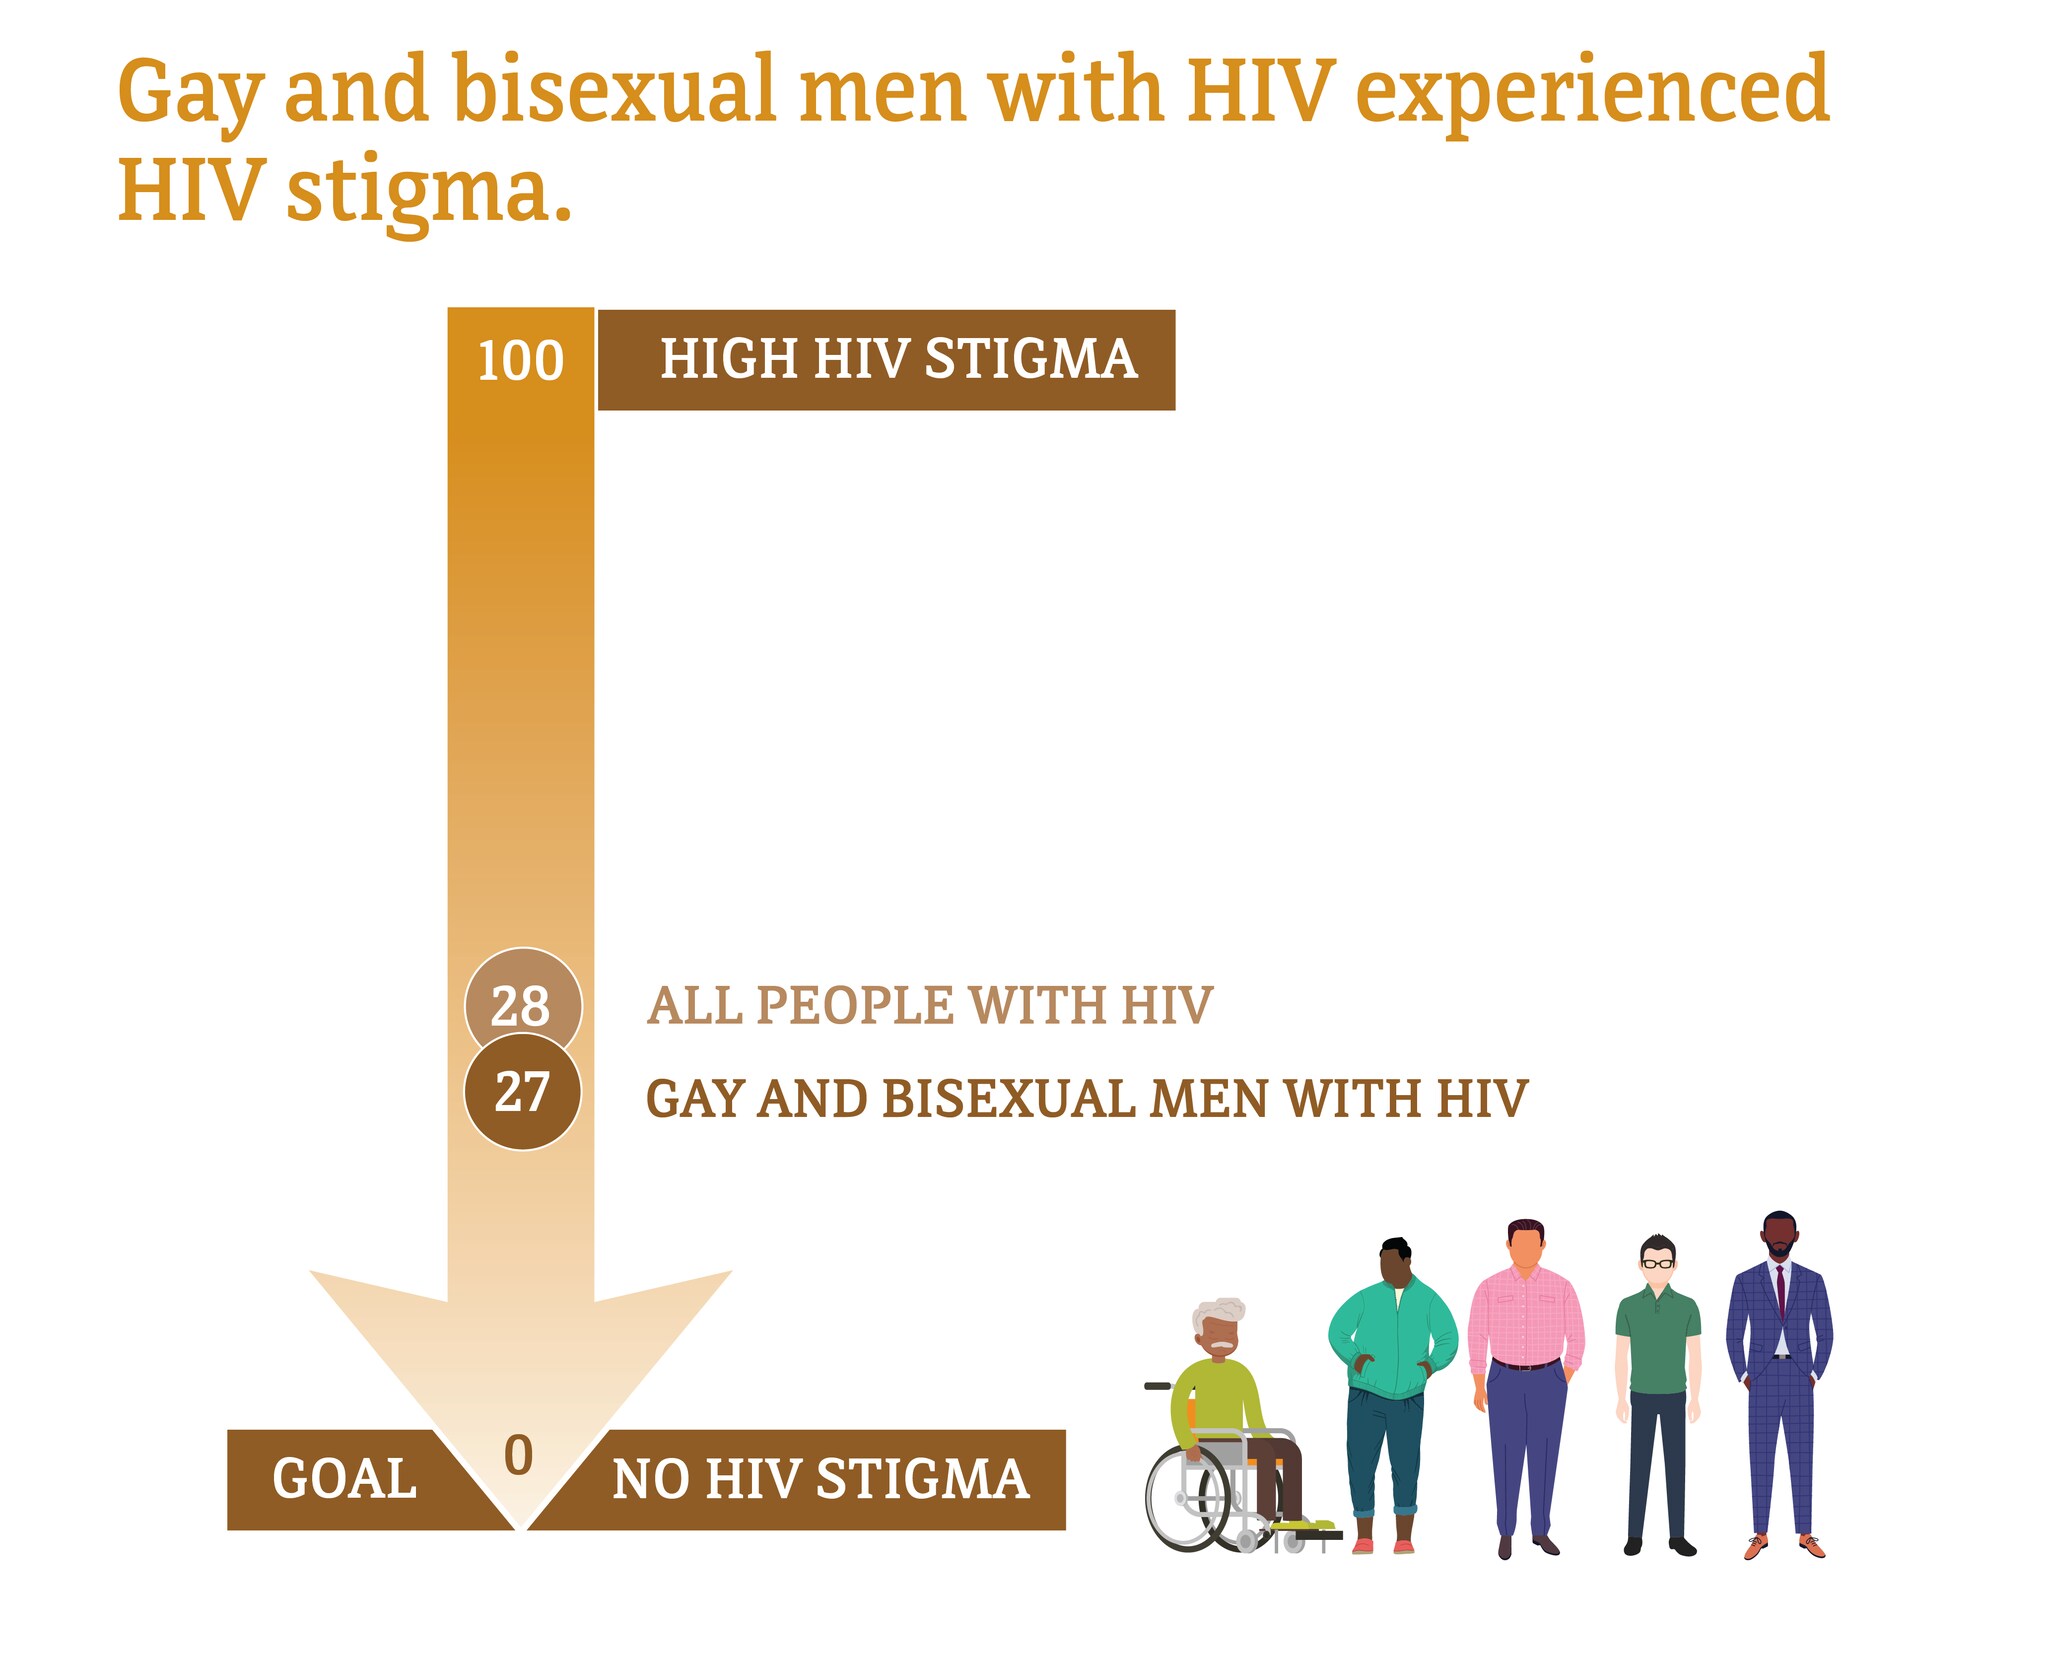 36 percent of gay and bisexual men with HIV experienced stigma. 